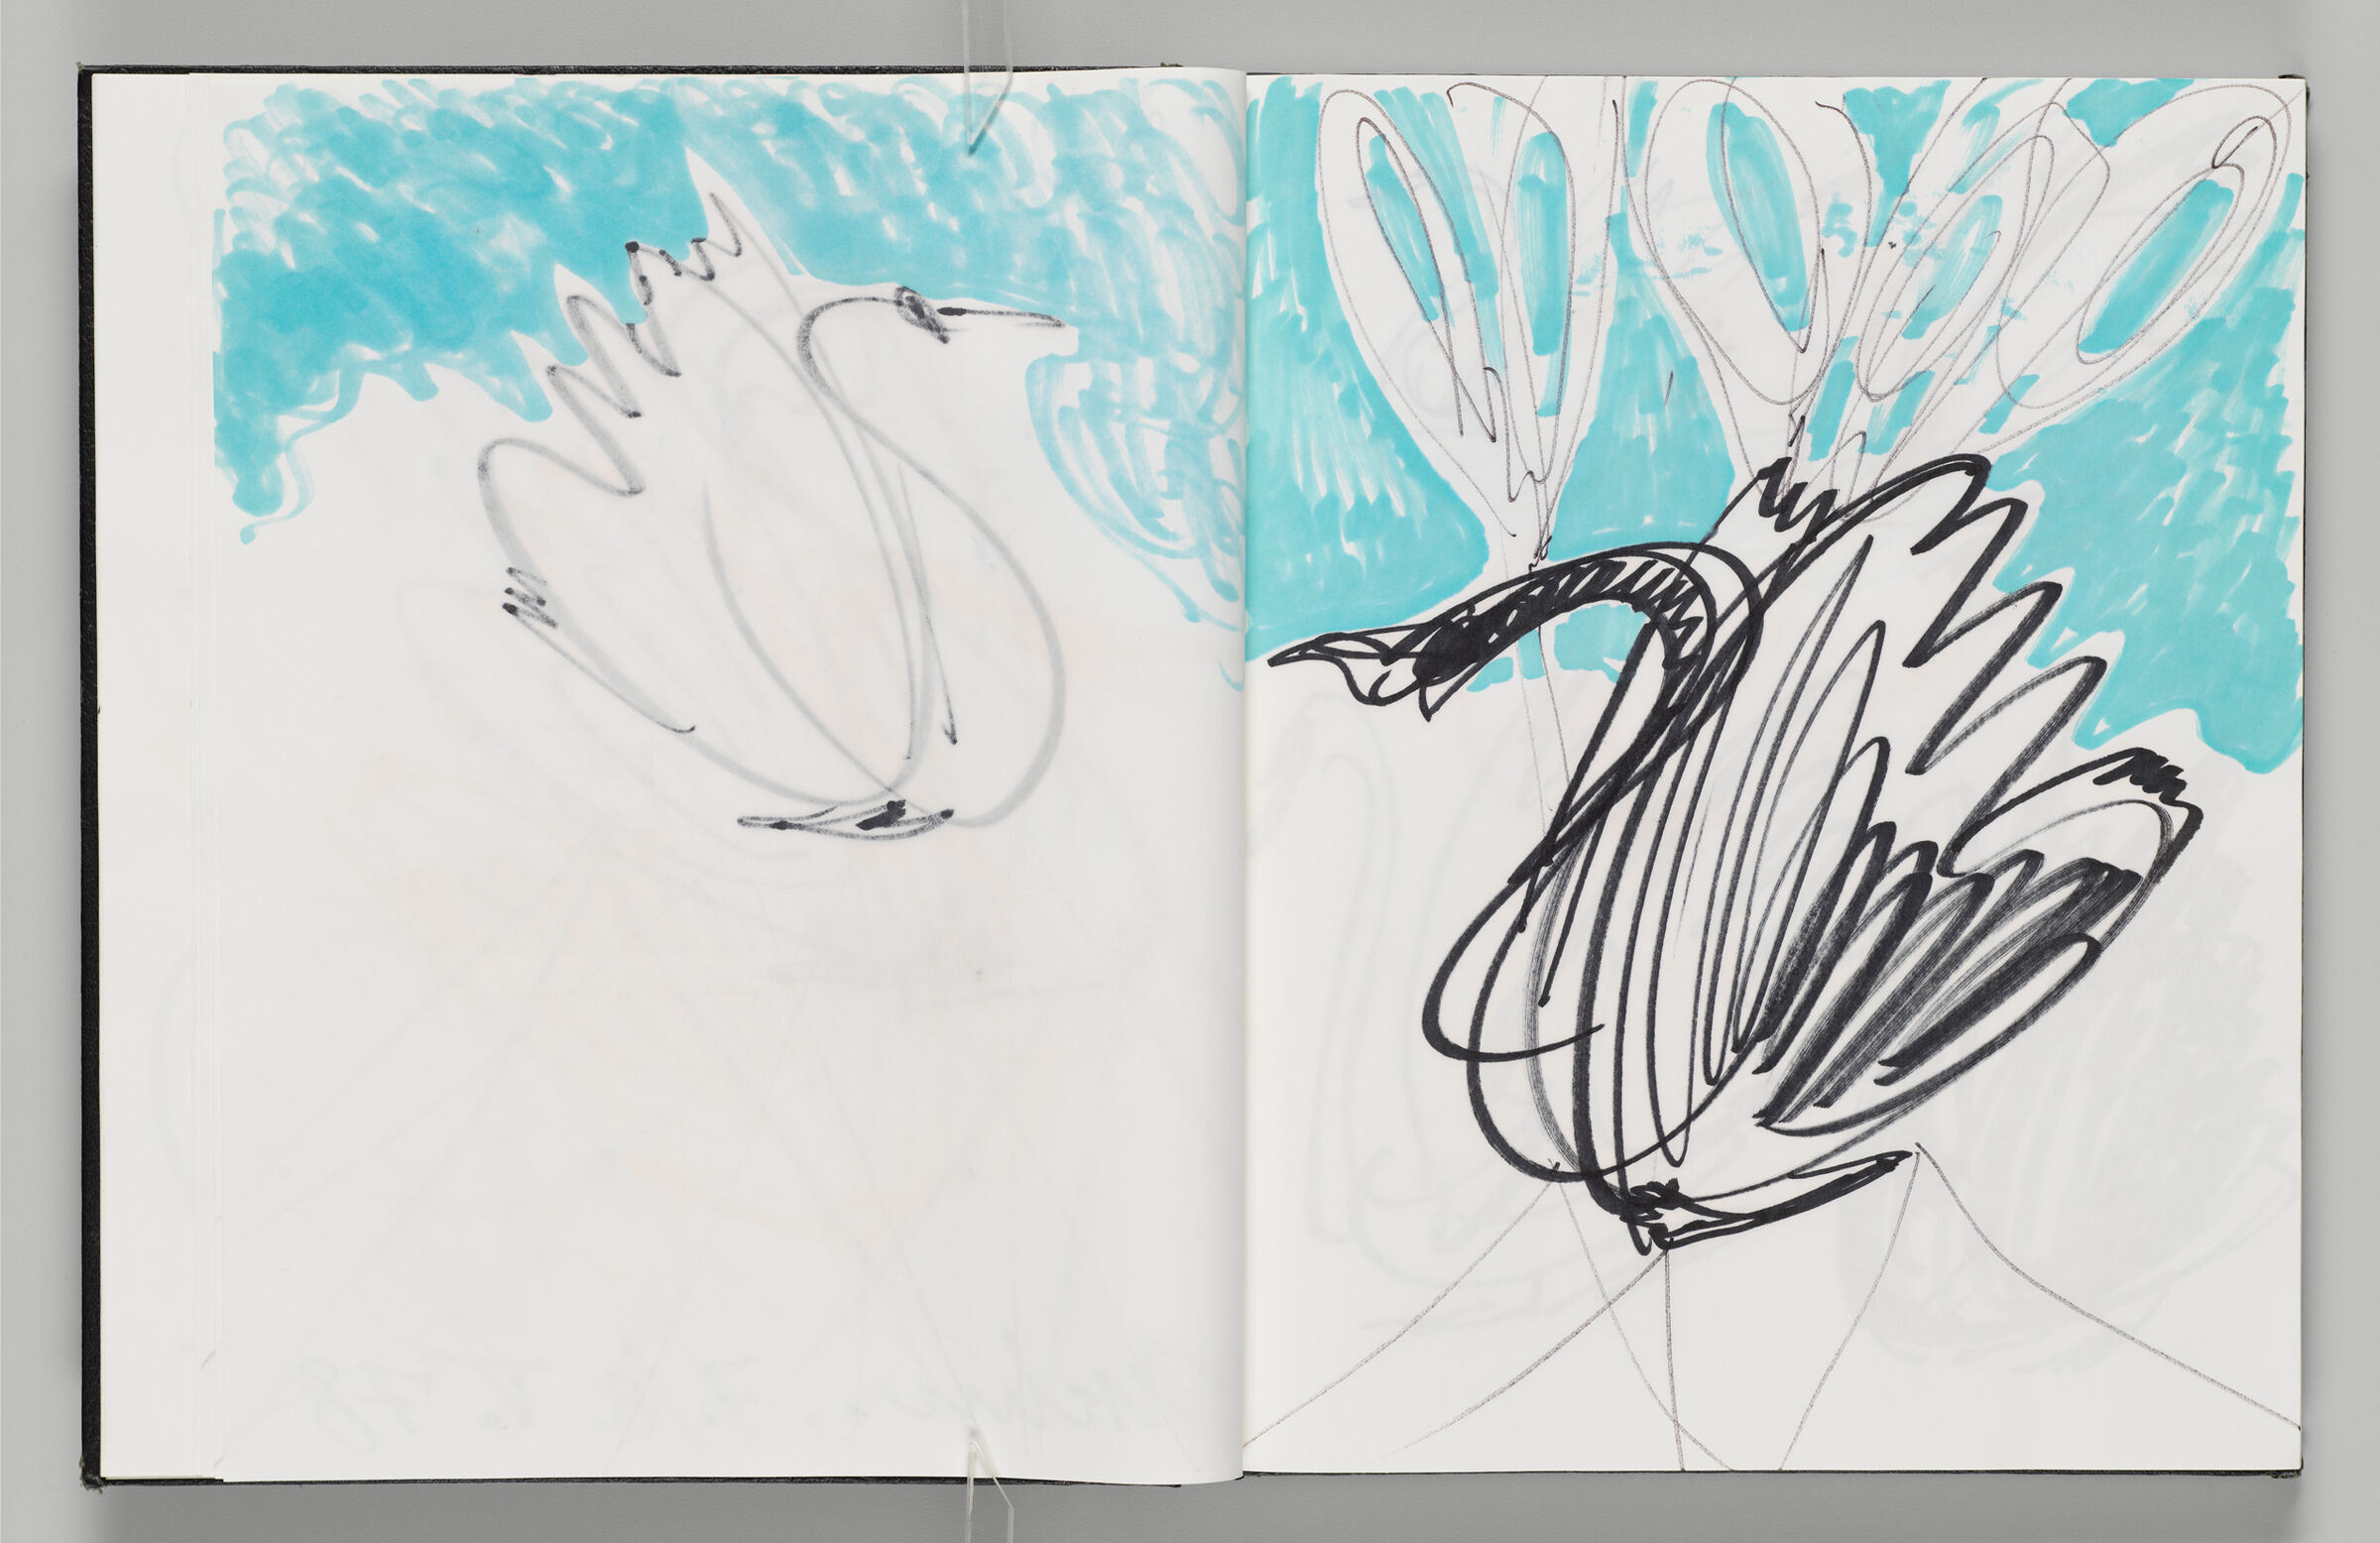 Untitled (Bleed-Through Of Previous Page, Left Page); Untitled (Black Swan Inflatable Against Aqua Sky, Right Page)